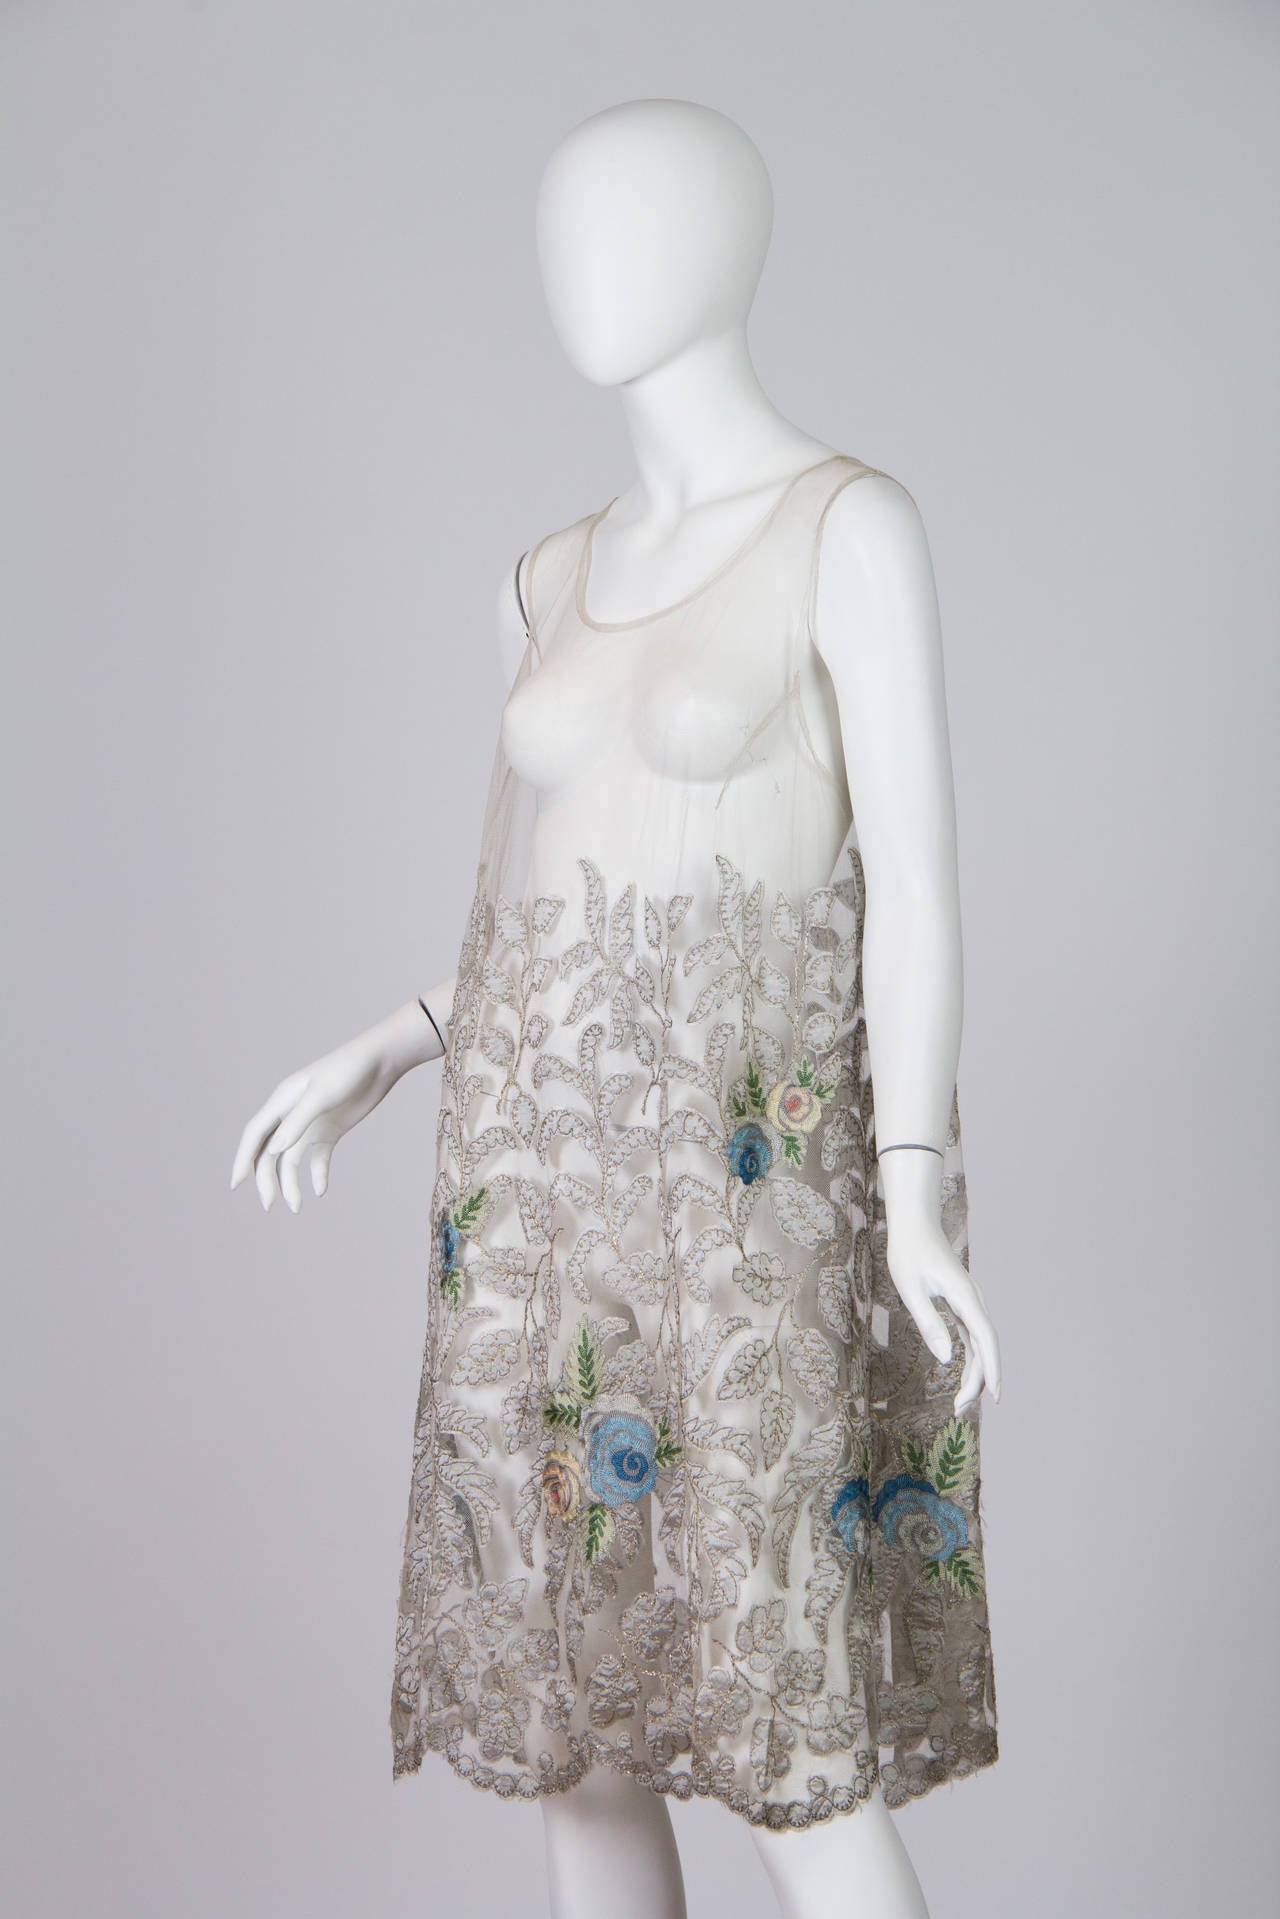 The finest silk net has been appliquéd with silk leaves, chain stitch embroidered in silver lamé thread with colorful flowers scattered about. In very fine near mint condition. A true beauty and unique technique from the 1920s.